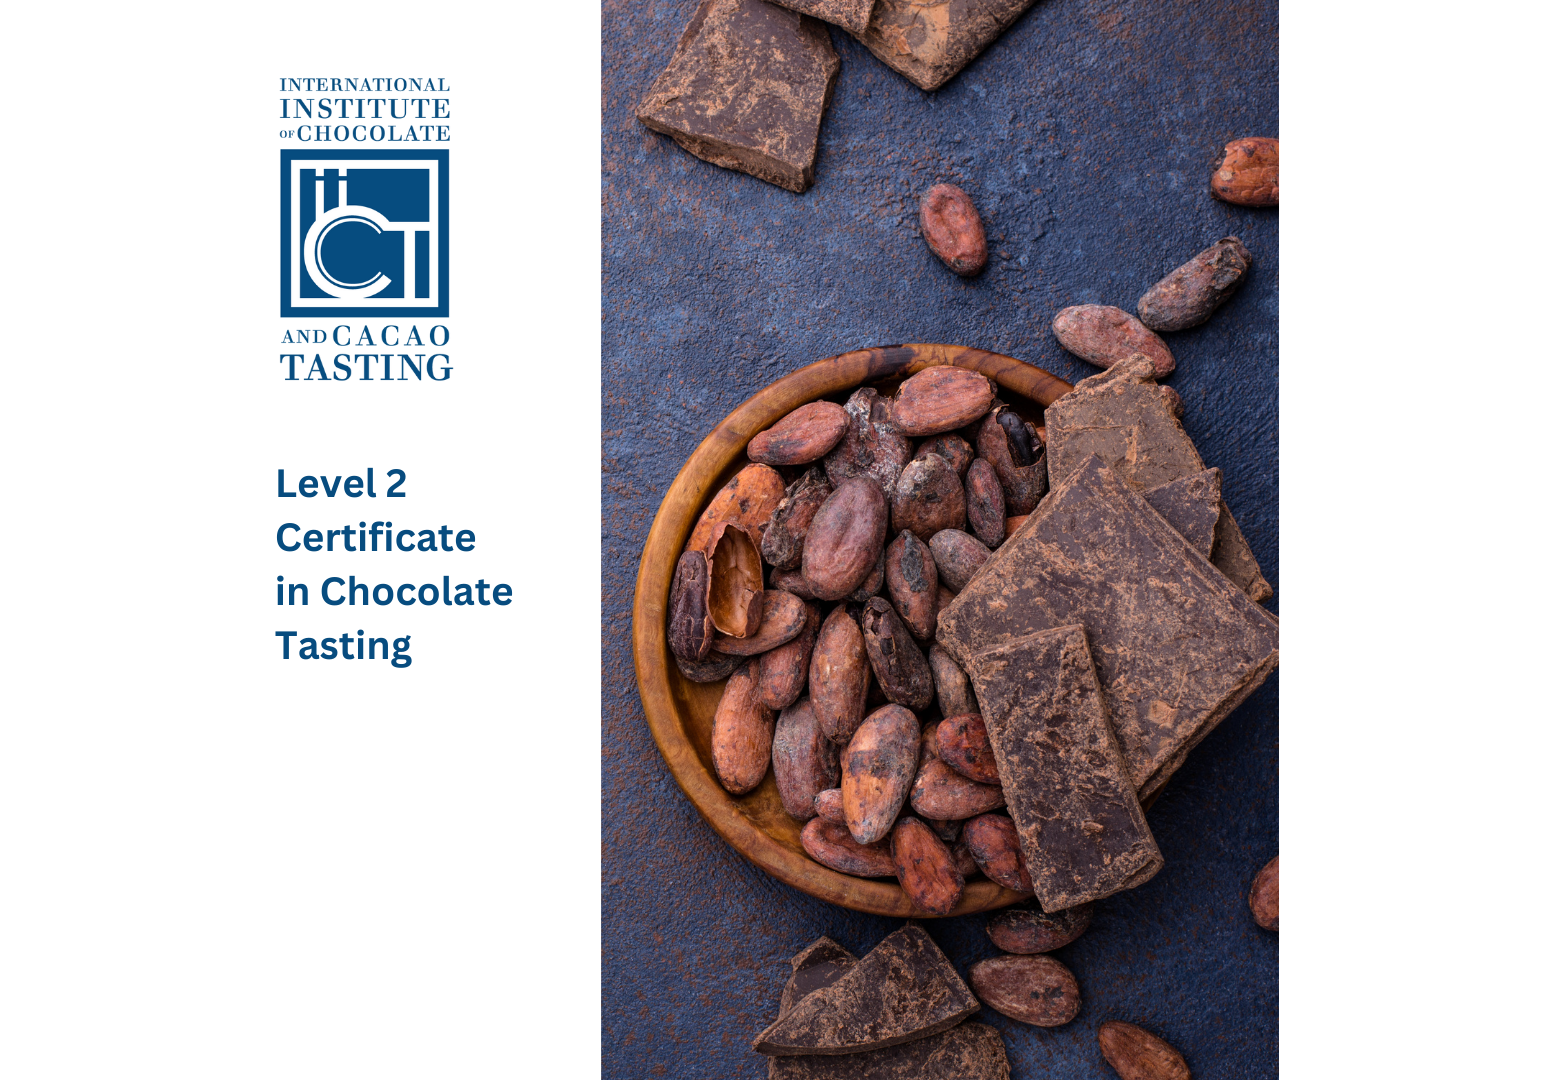 IICCT Level 2 Certificate in Chocolate Tasting